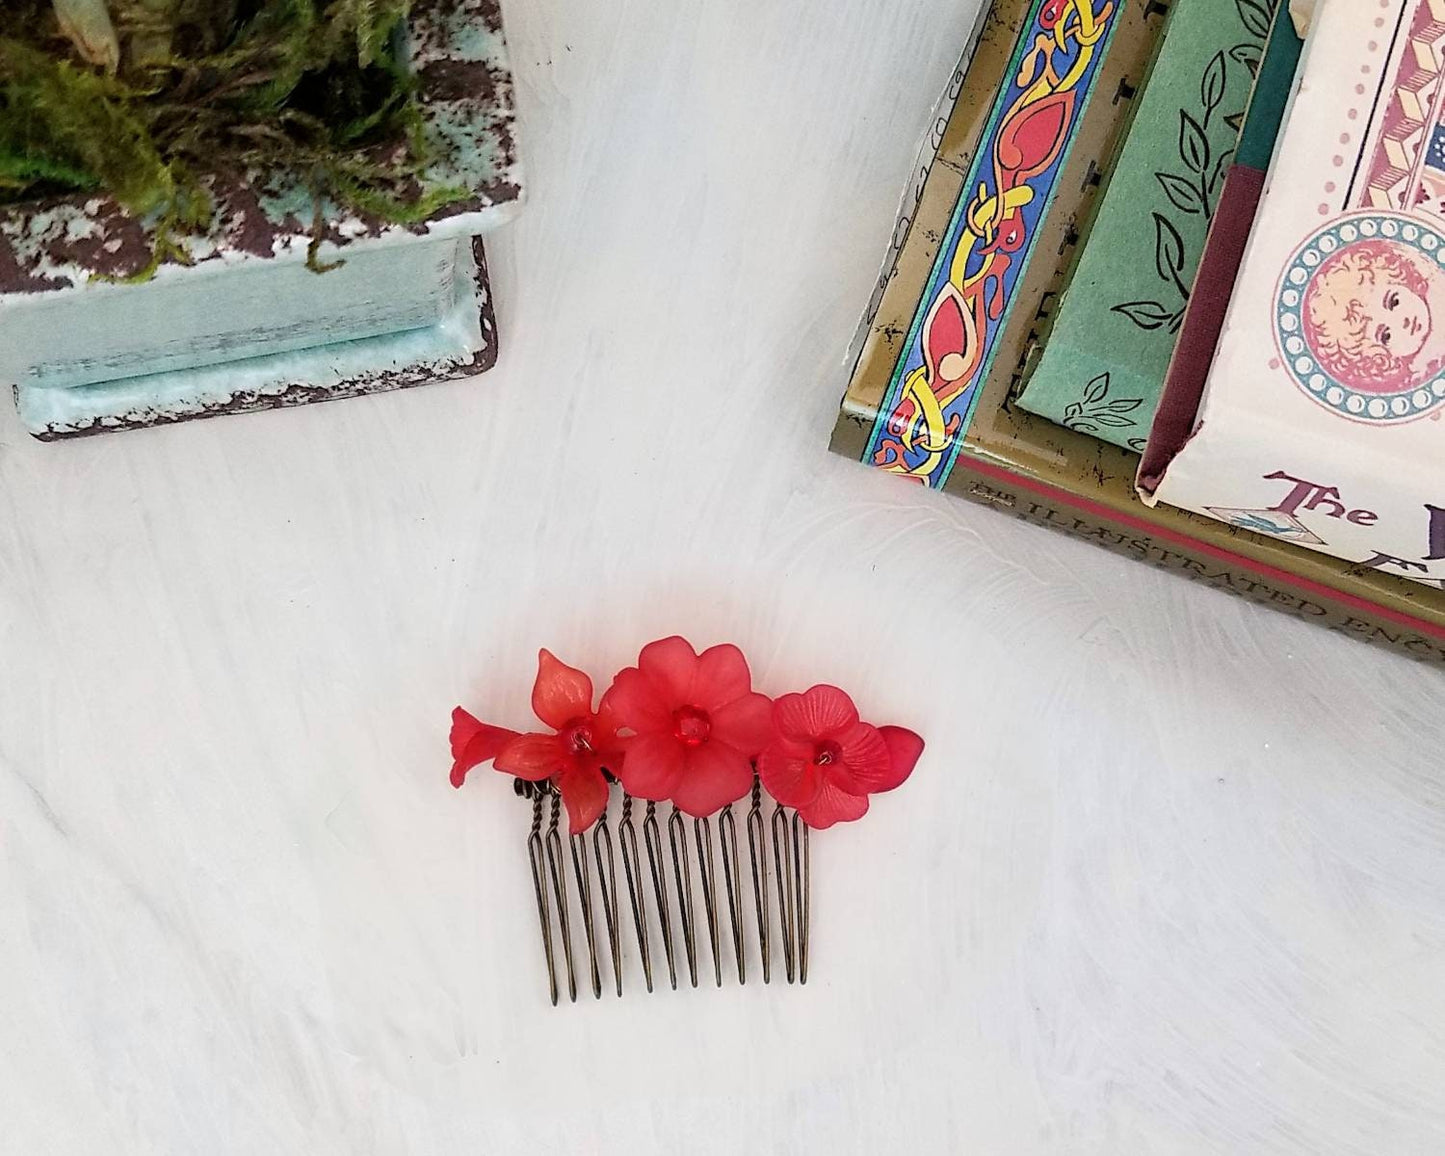 Wire Wrapped Lucite Flower Comb in Red, Bridesmaid, Wedding, Floral, Garden, Party, Boho, Bohemian, Choice of Colors and Metals